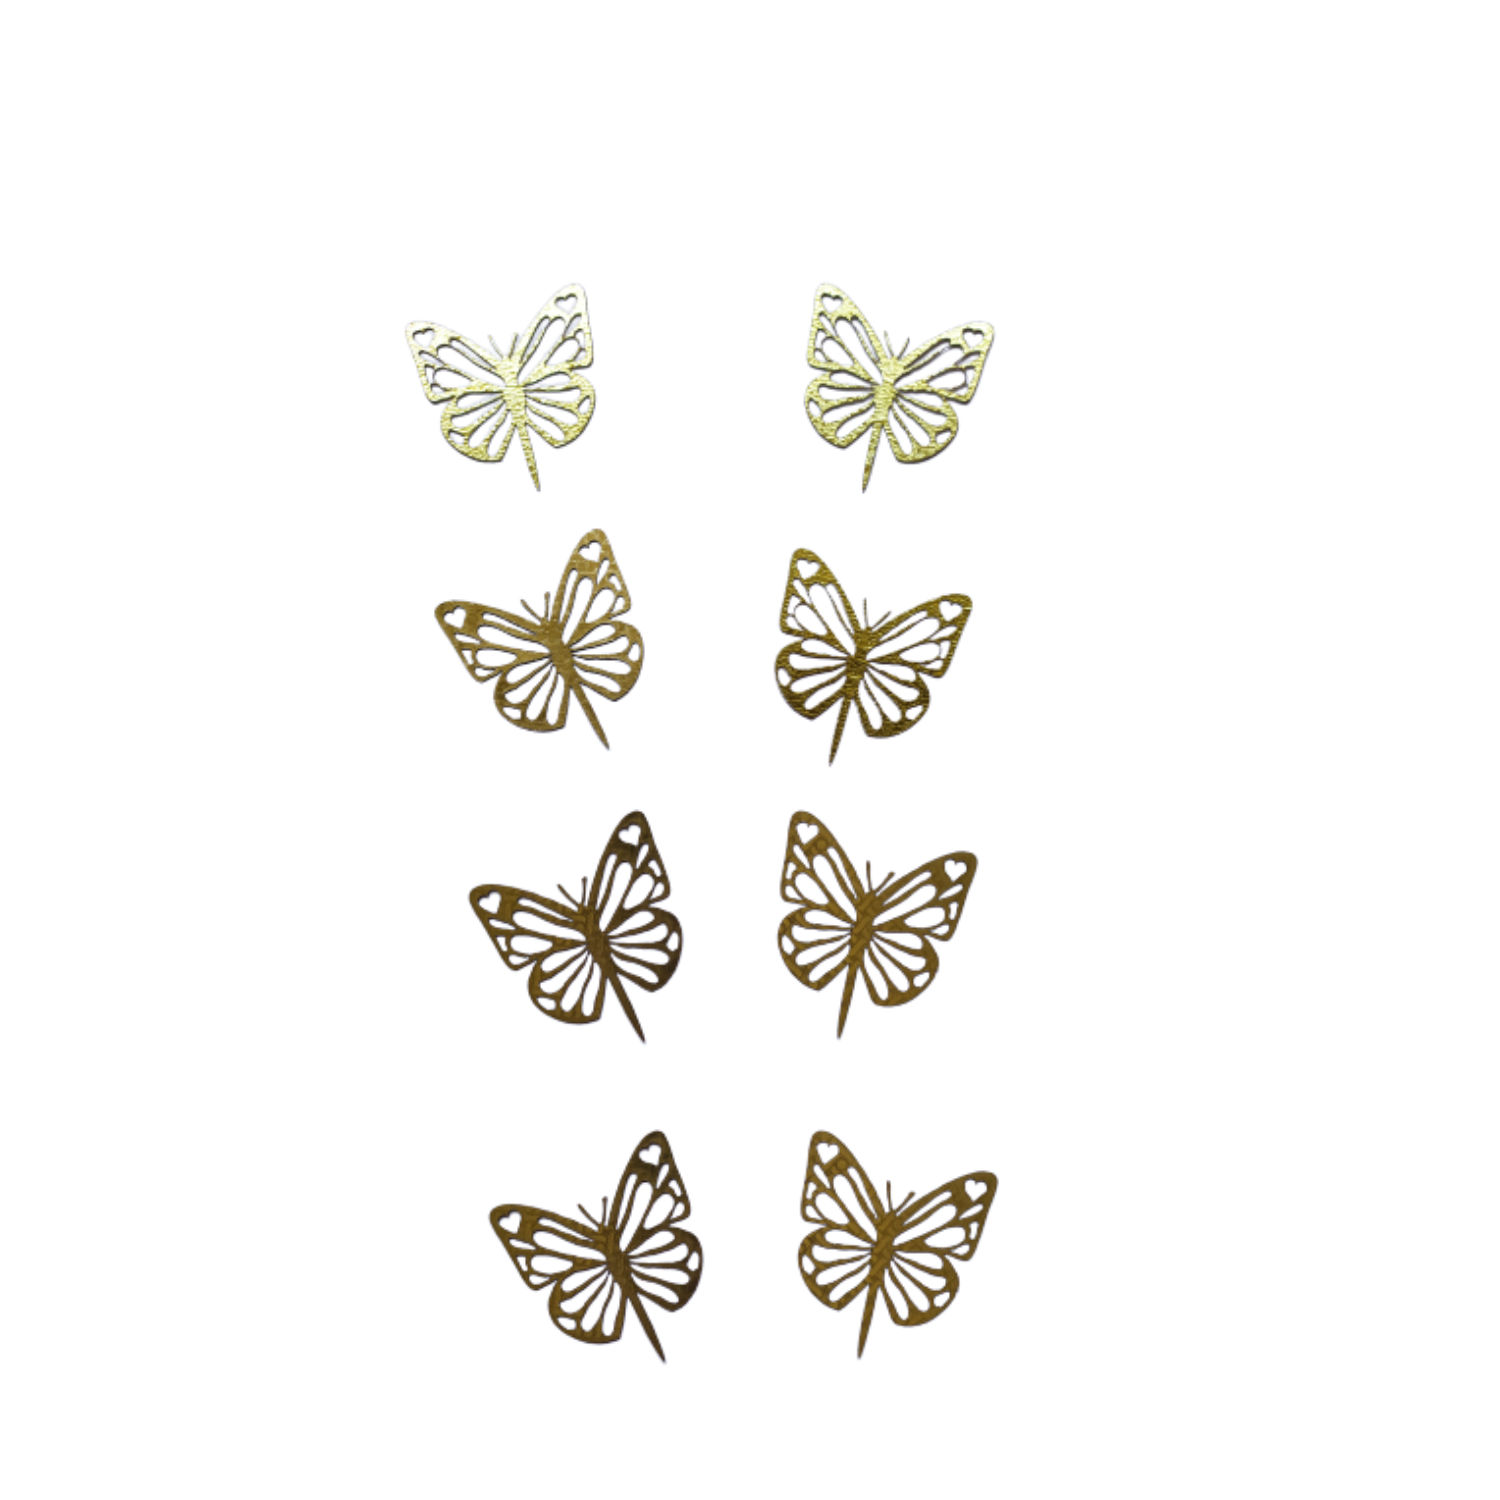 Yorkker  Acrylic Butter fly Cake topper For Cake And Cupcake Decoration Set of 8 pcs